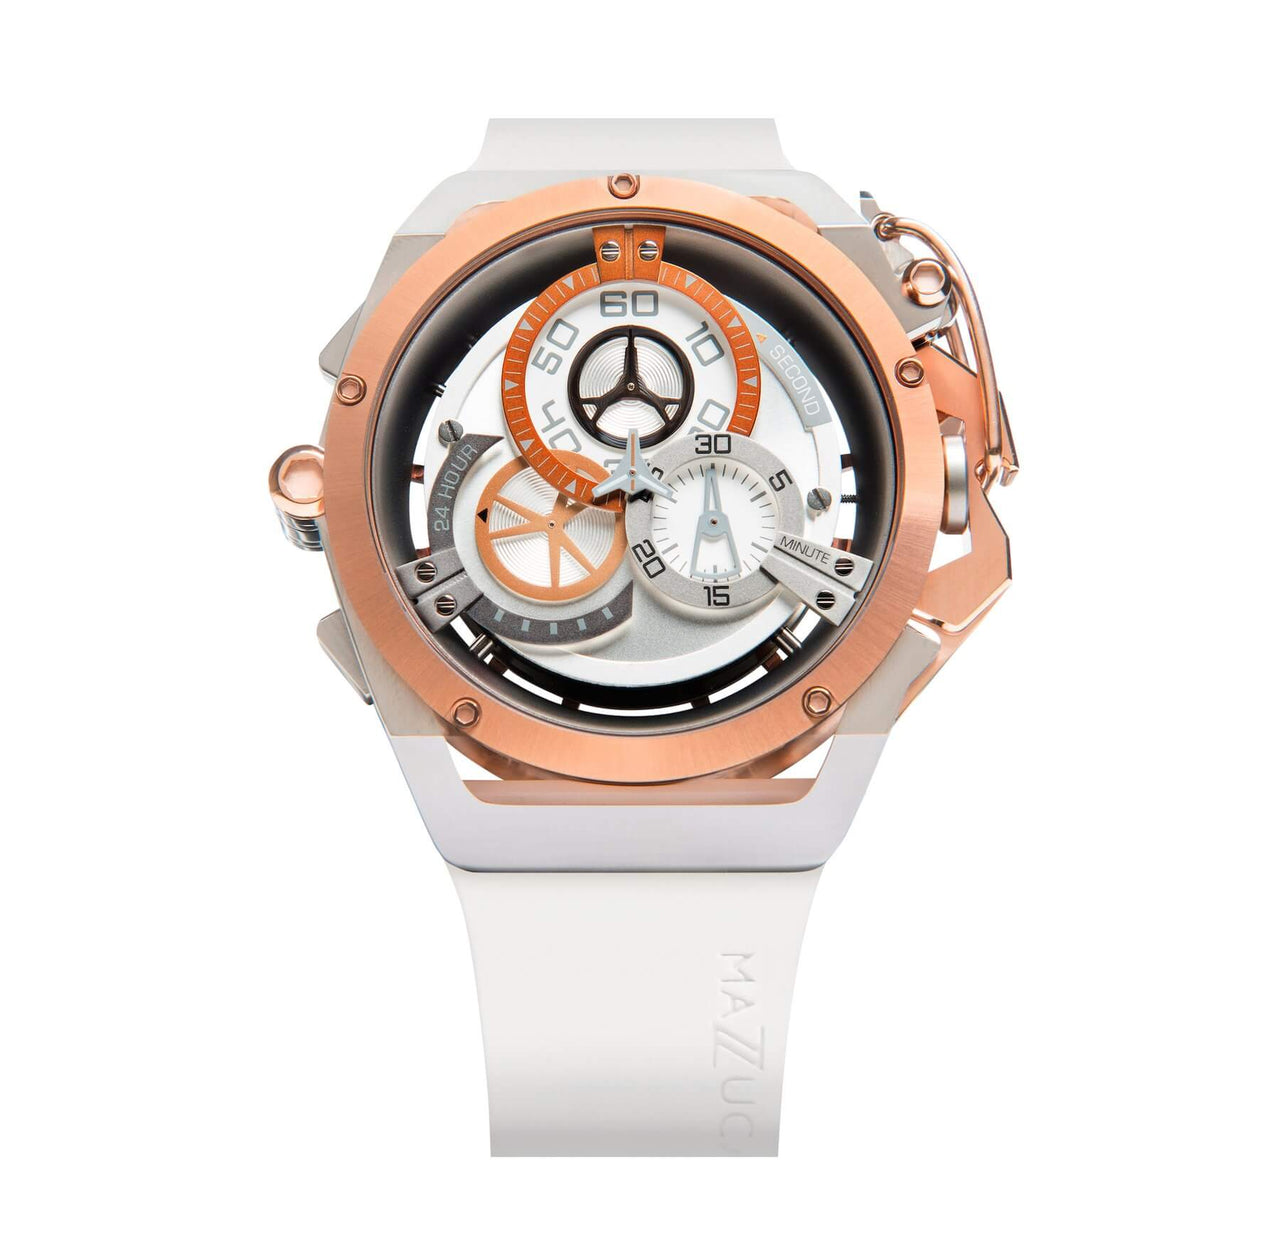 Mazzucato Reversible RIM Gold - Watches & Crystals